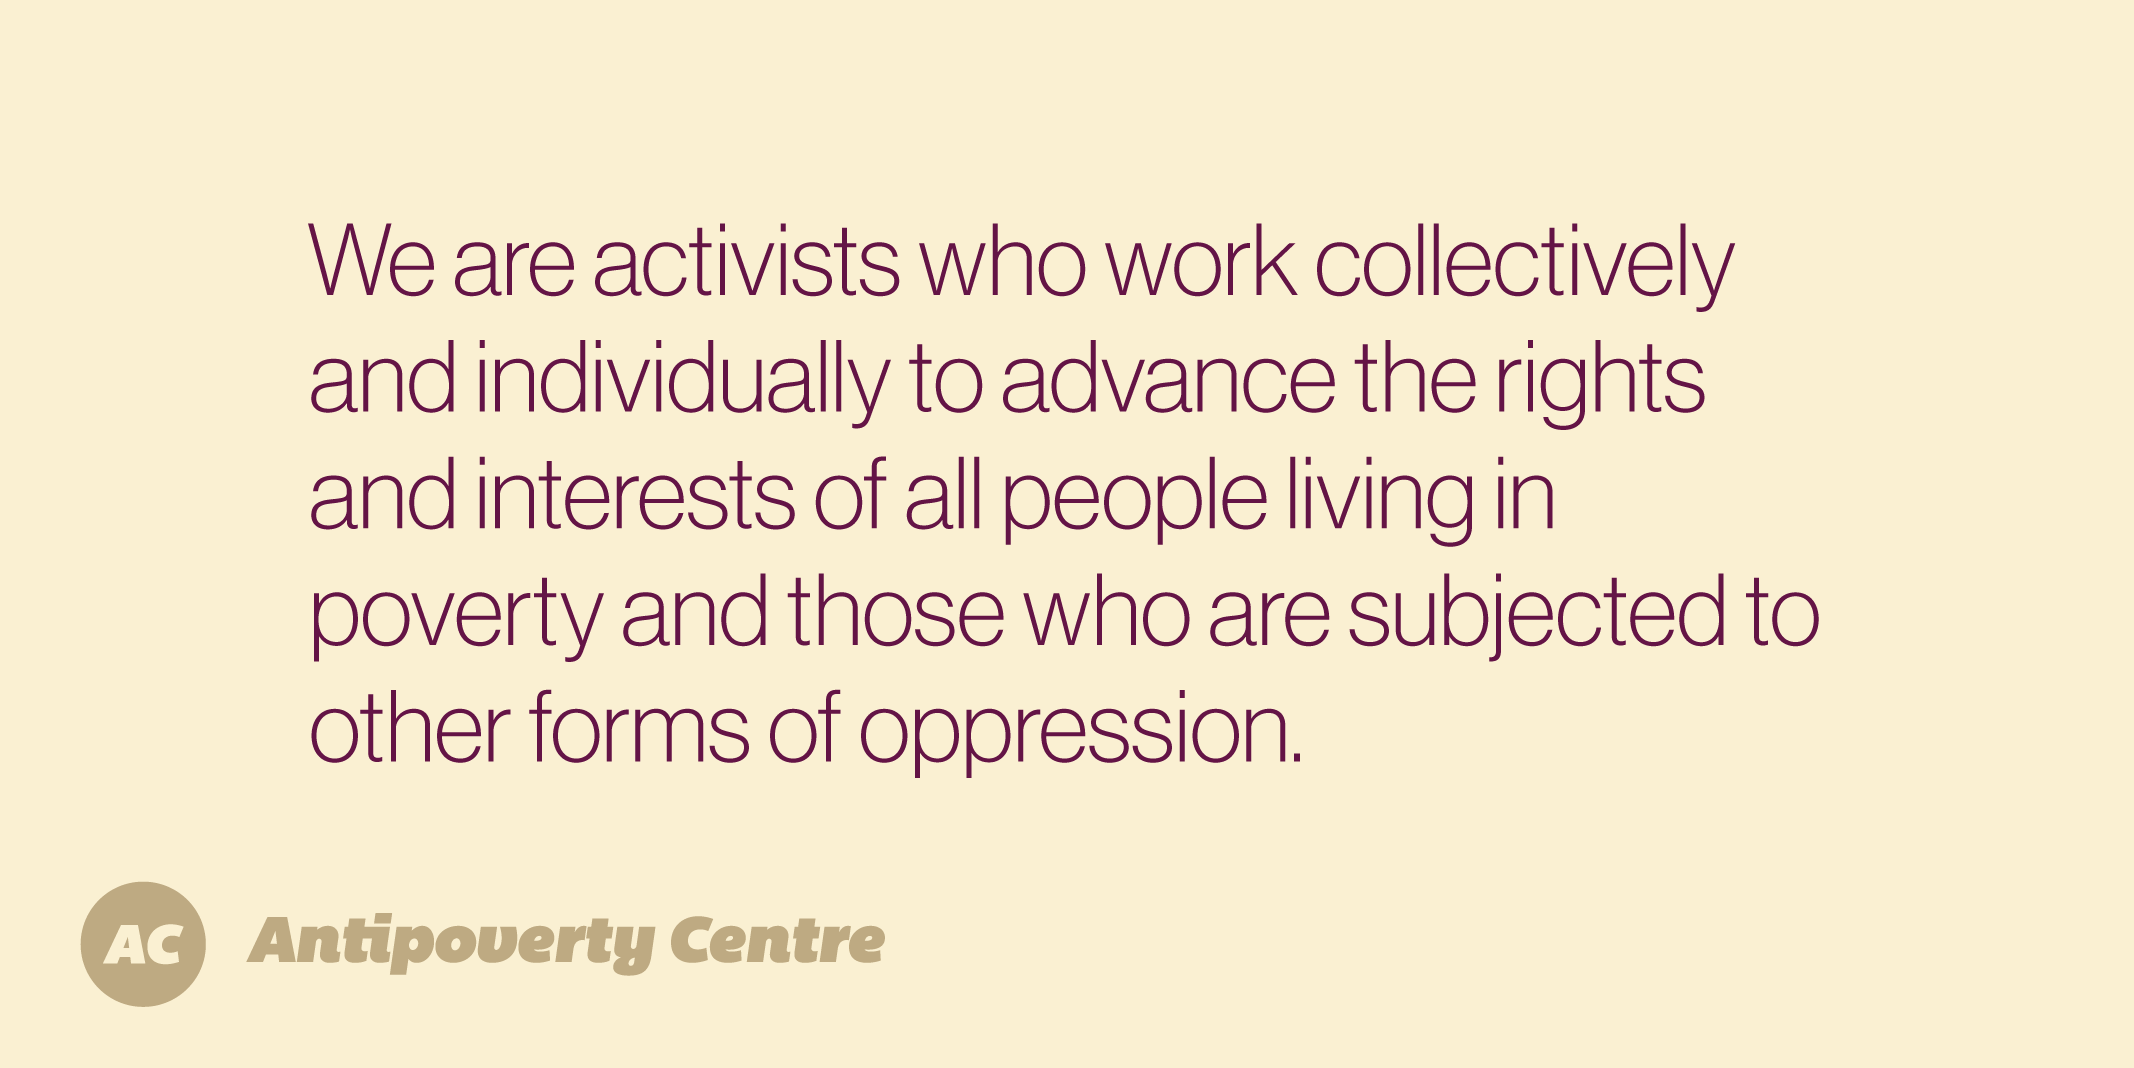 Graphic with the text: "We are activists who work collectively and individually to advance the rights and interests of all people living in poverty and those who are subjected to other forms of oppression."